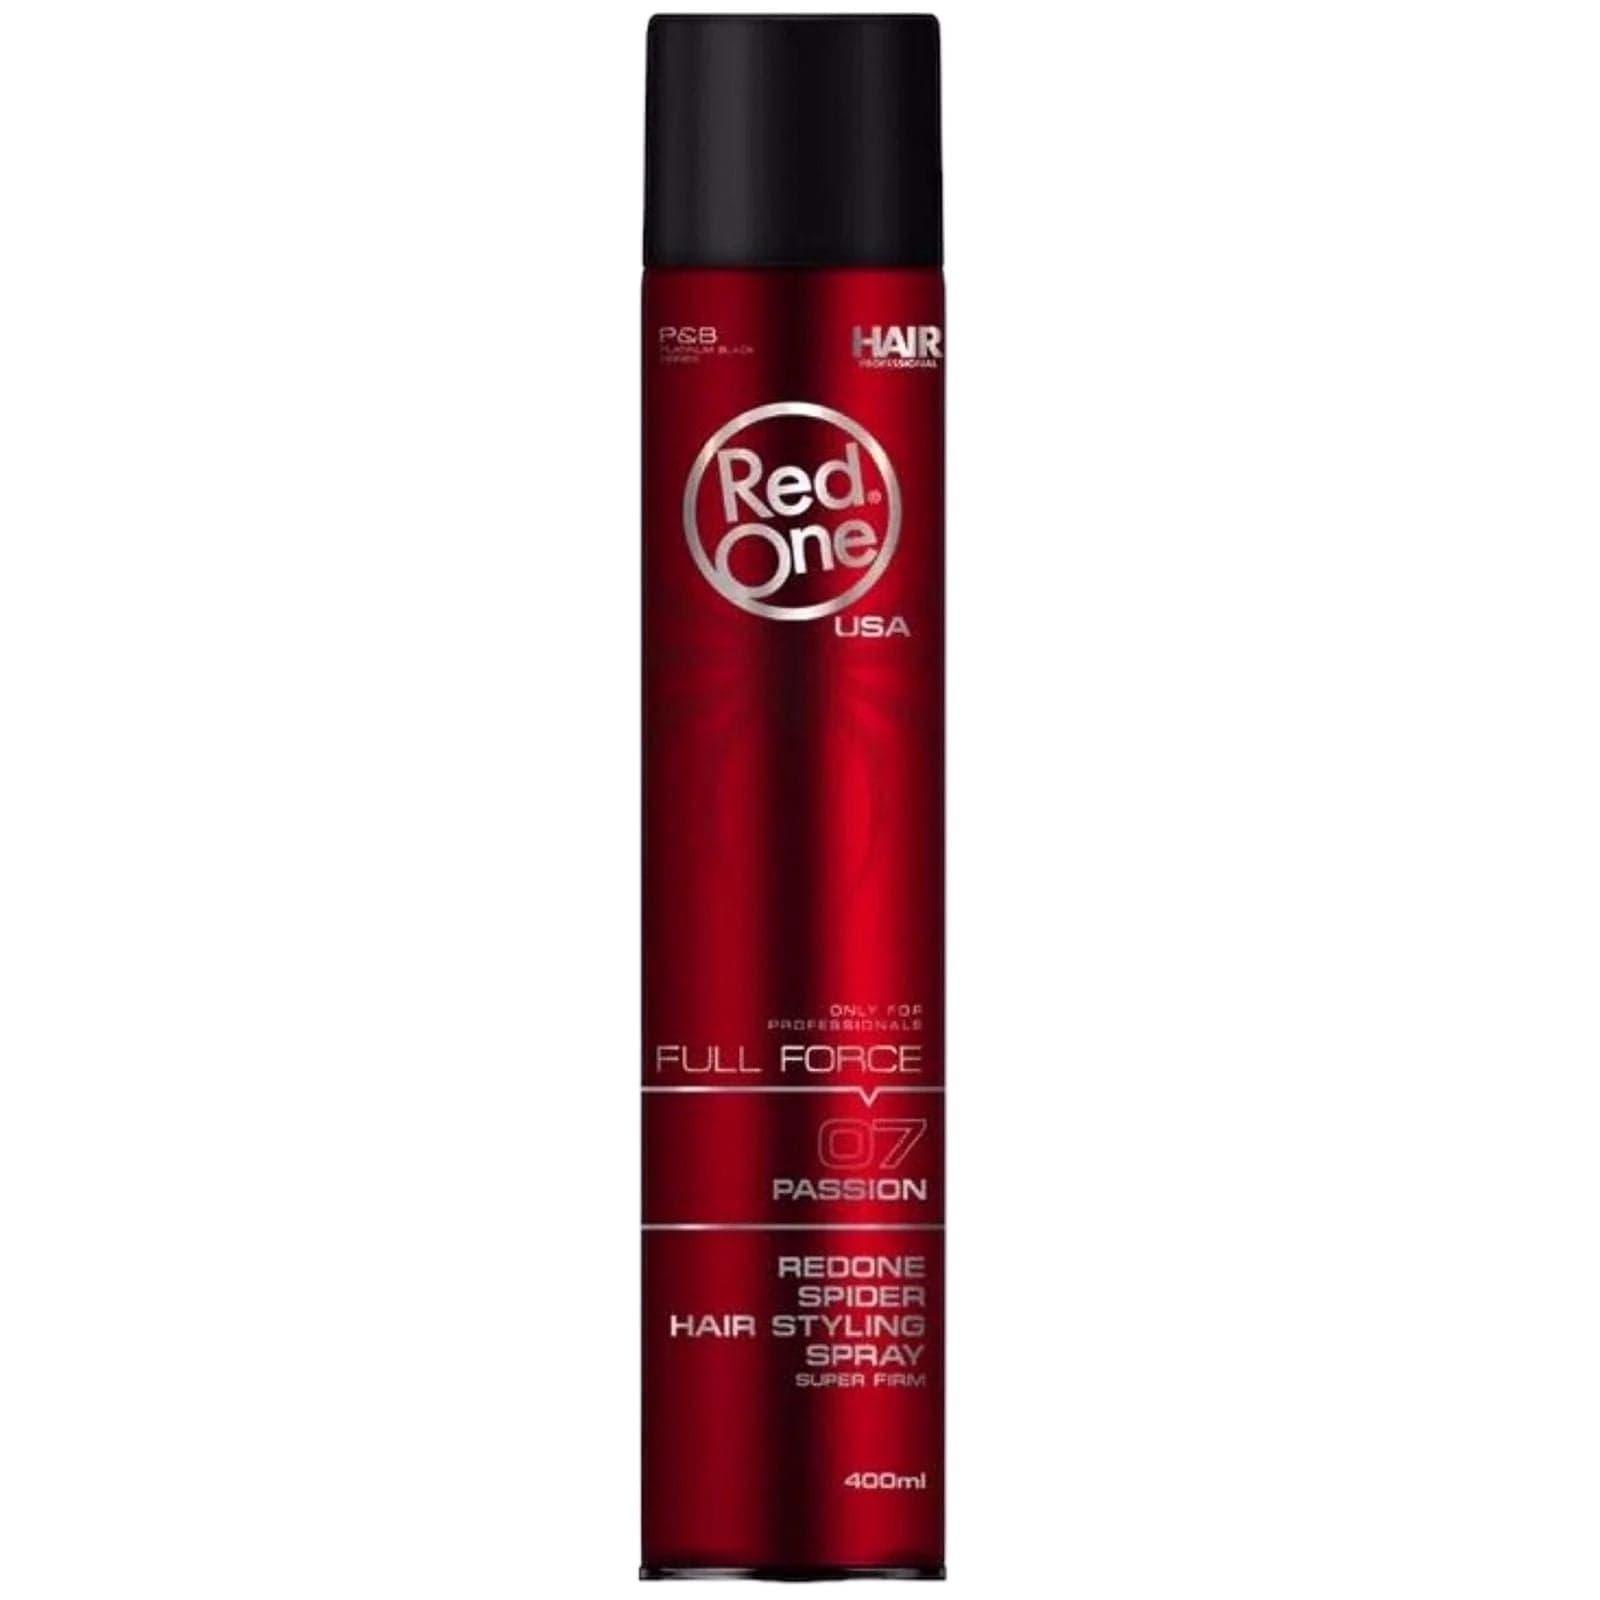 Redone Full Force Spider Hair Styling Spray Passion 07 400ml